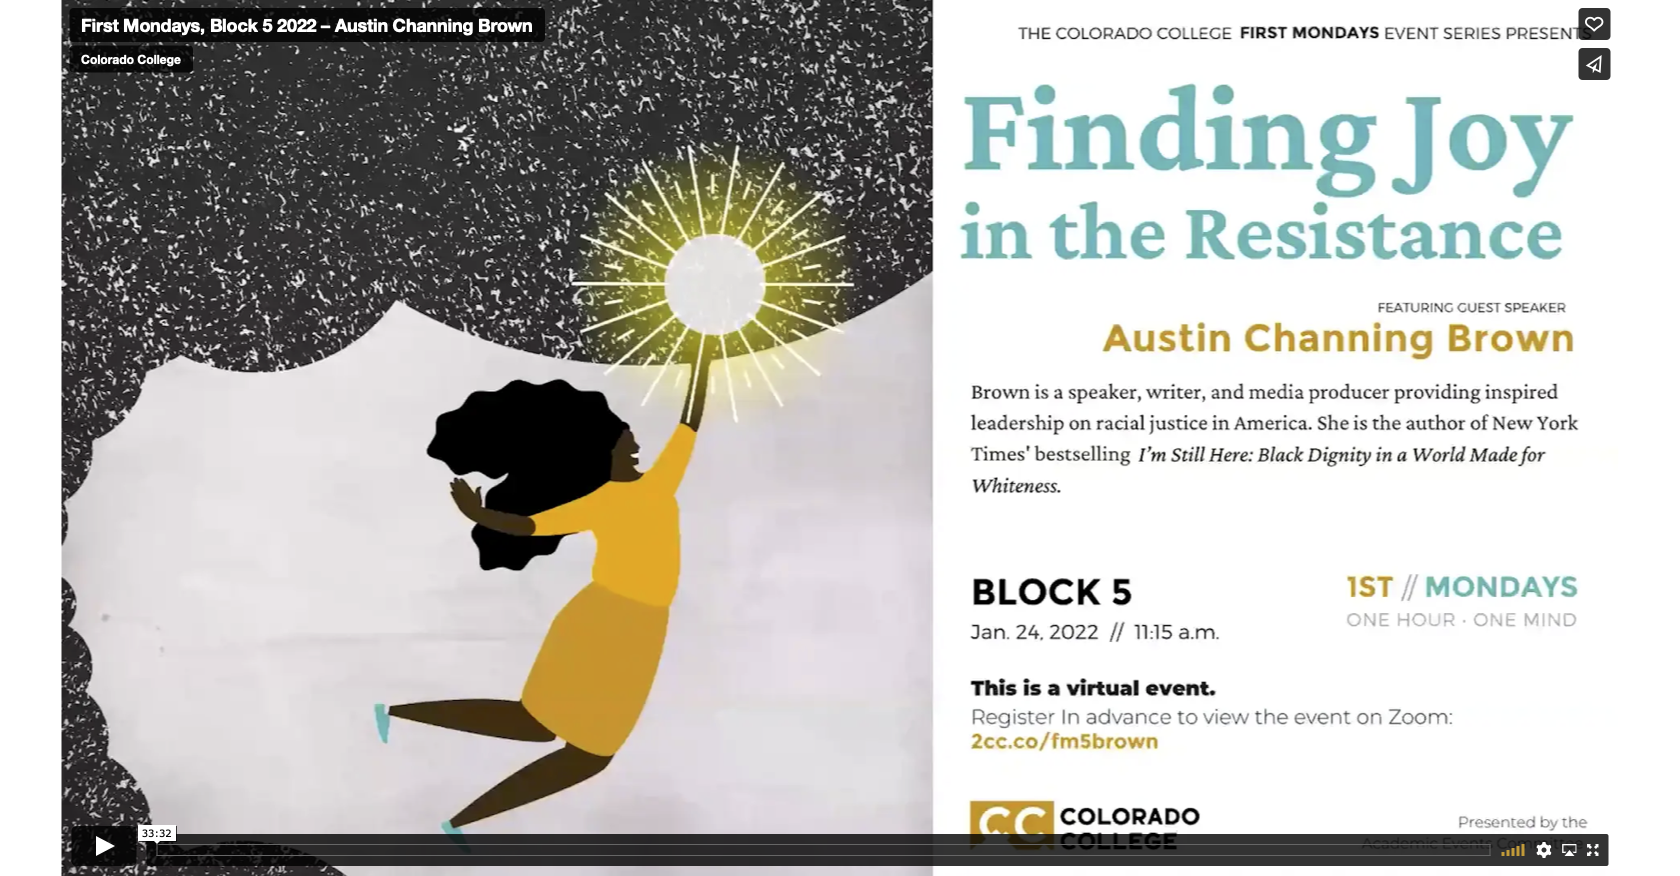 First Mondays, Block 5 2022 Austin Channing Brown from Colorado College on Vimeo